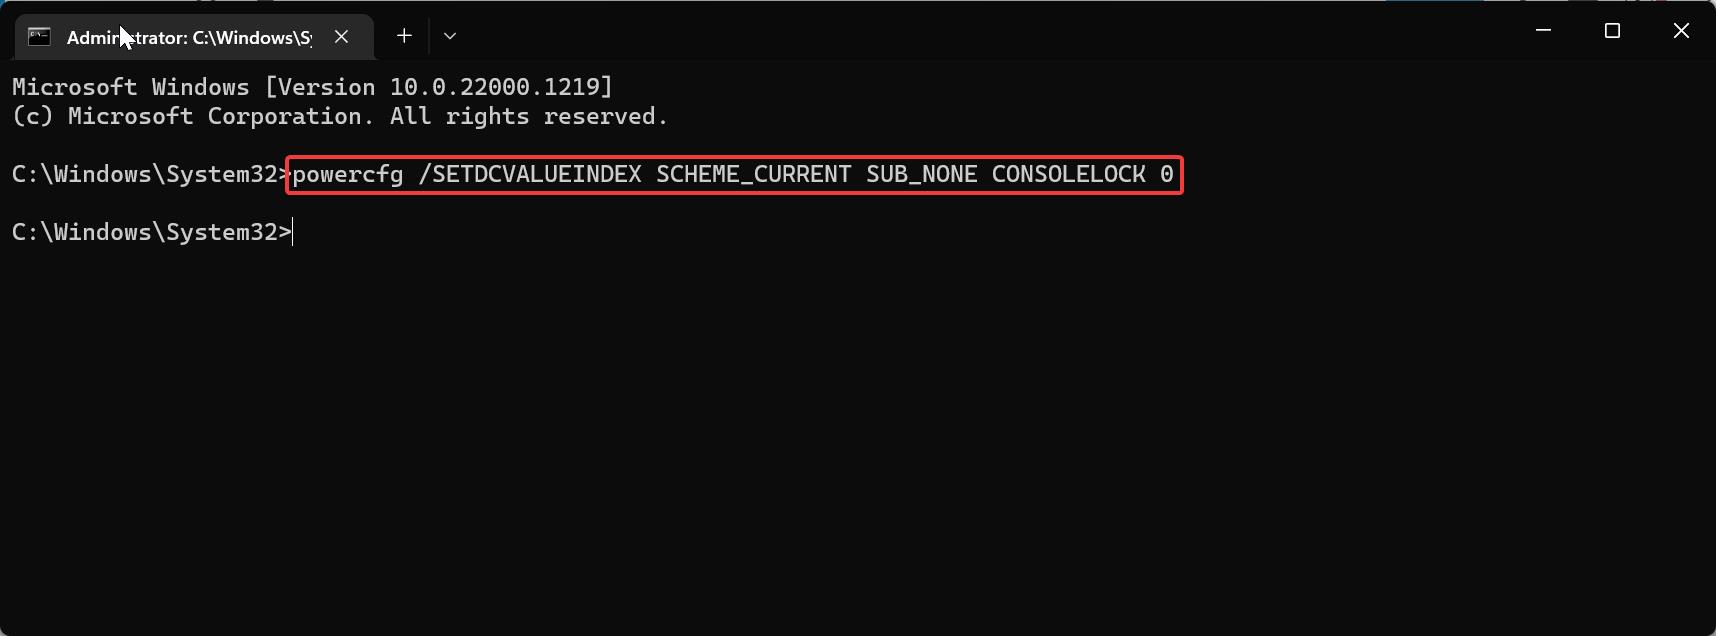 Skip sign-in page after resuming from sleep using command prompt